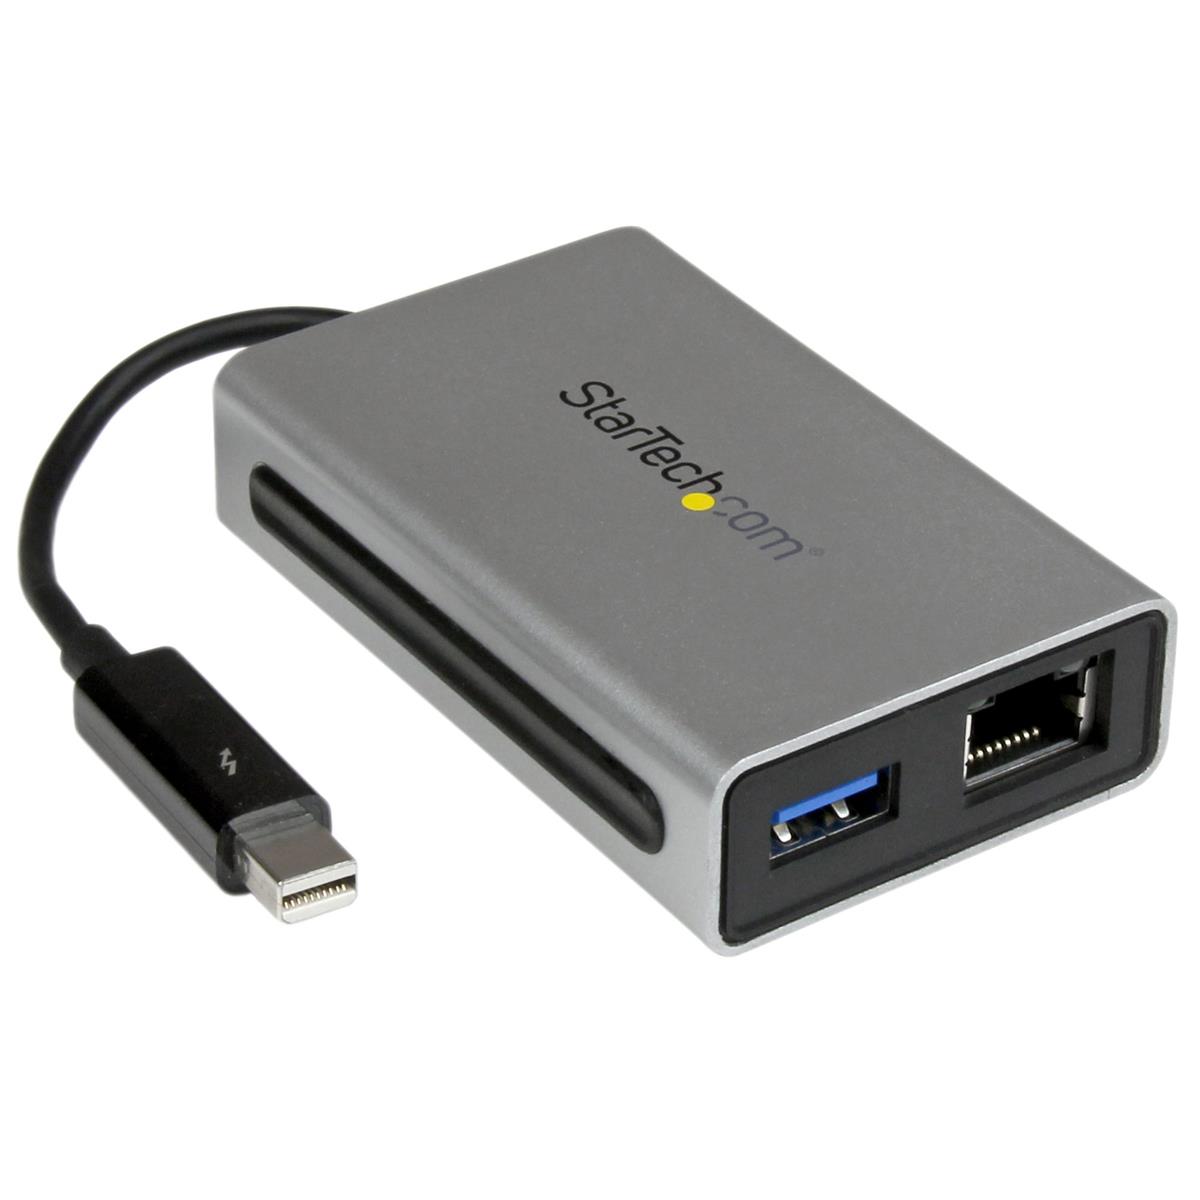 Image of StarTech Thunderbolt to Gigabit Ethernet and USB 3.0 Adapter